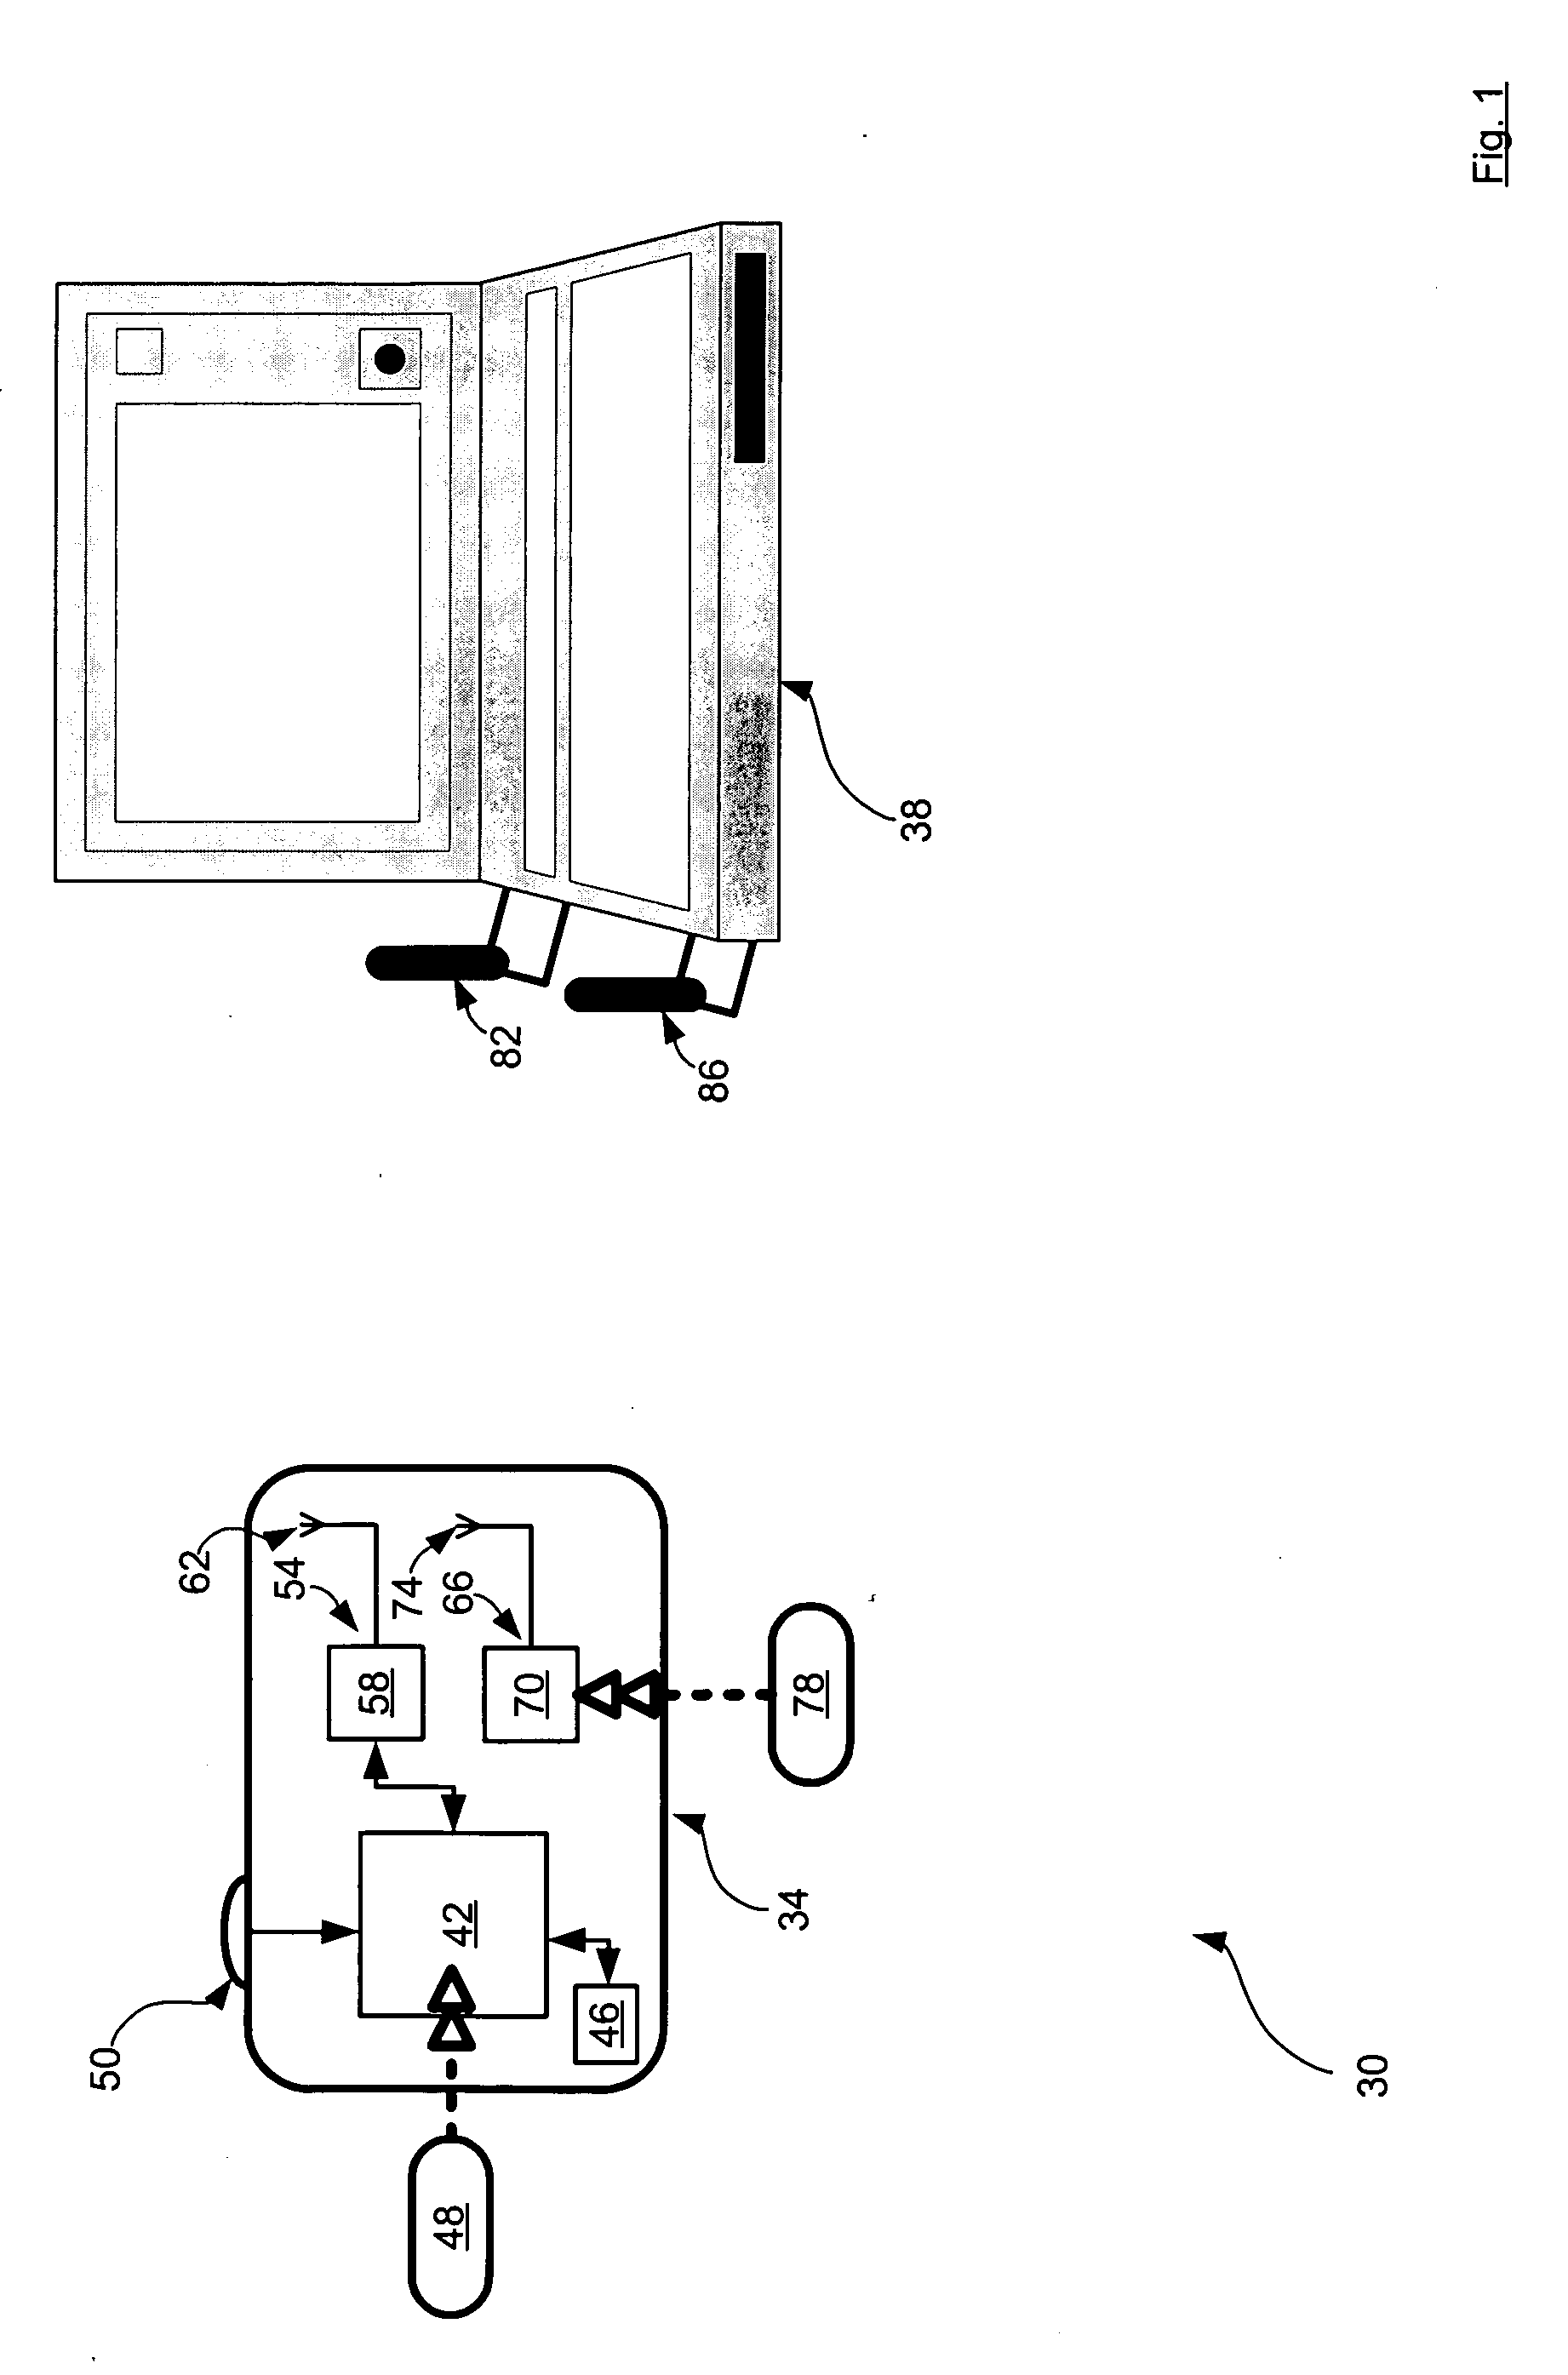 Security access device and method